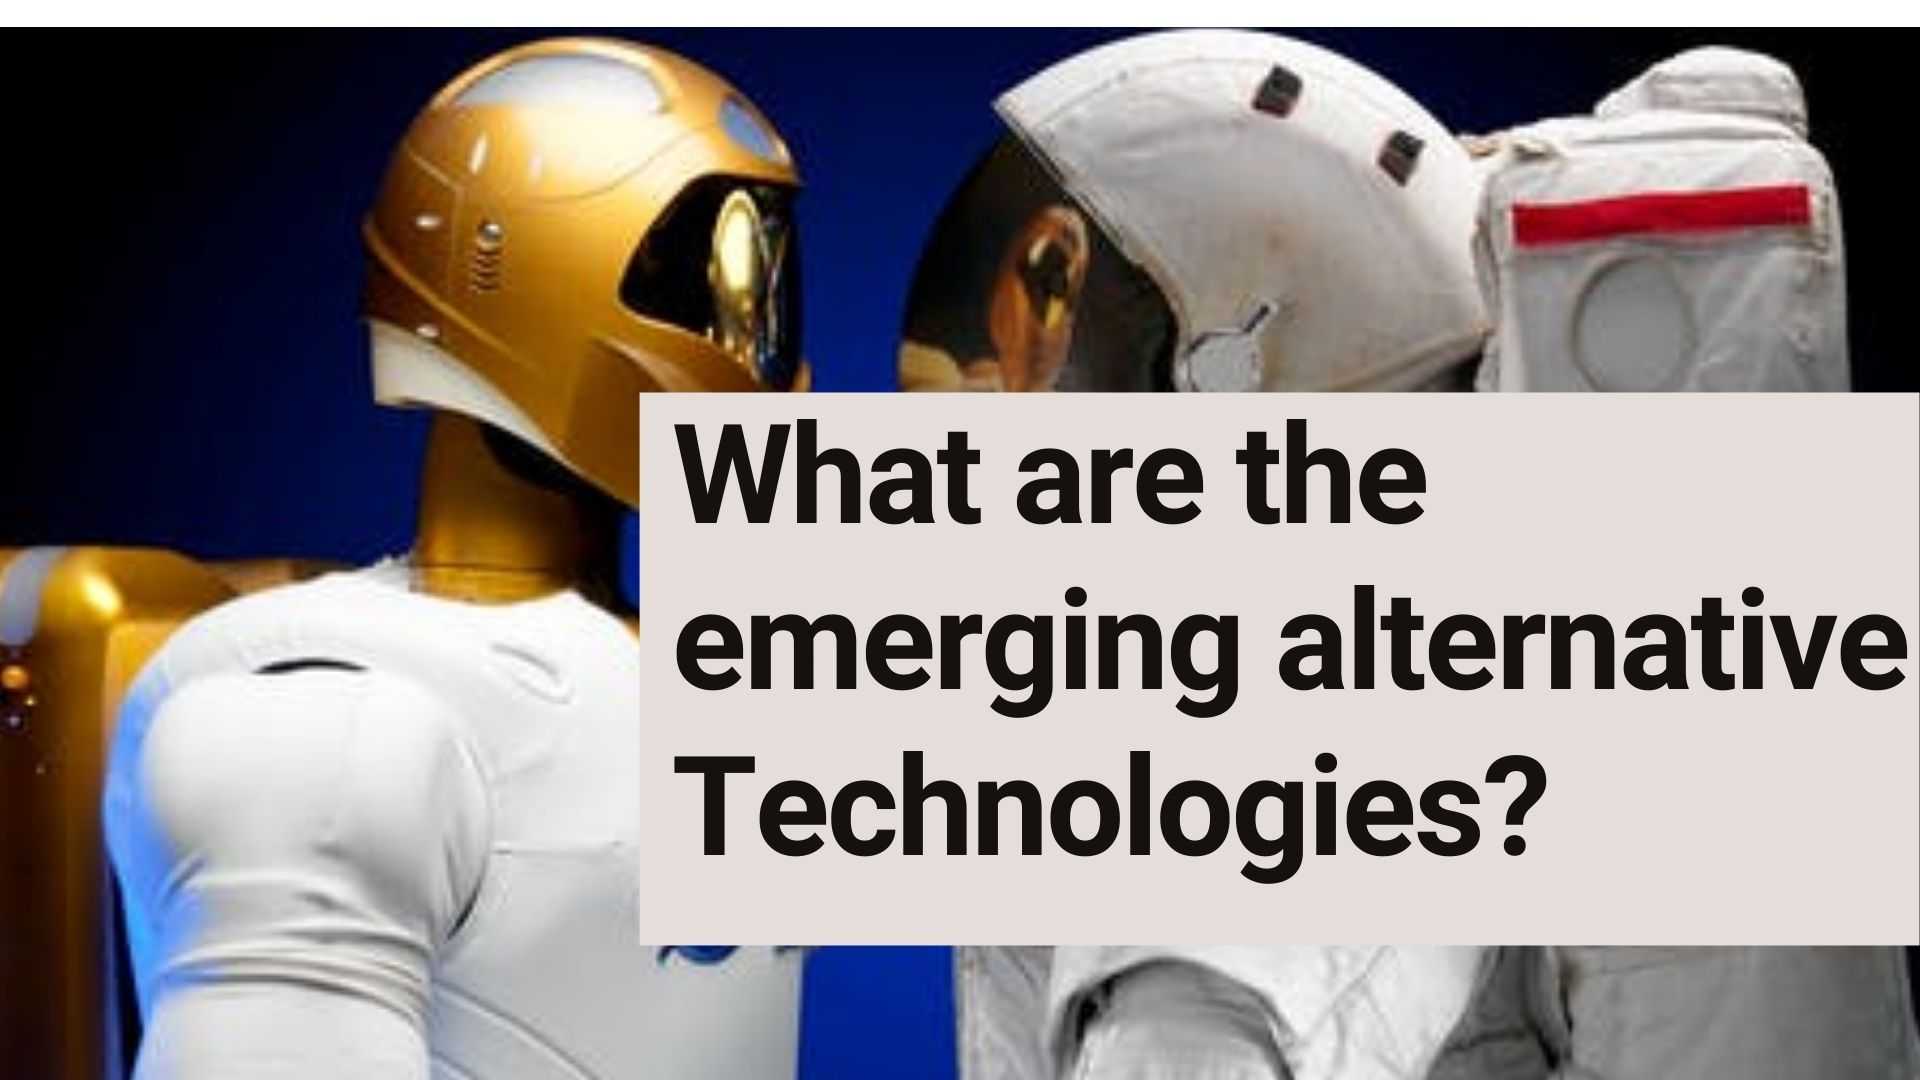 What are the emerging alternative Technologies?